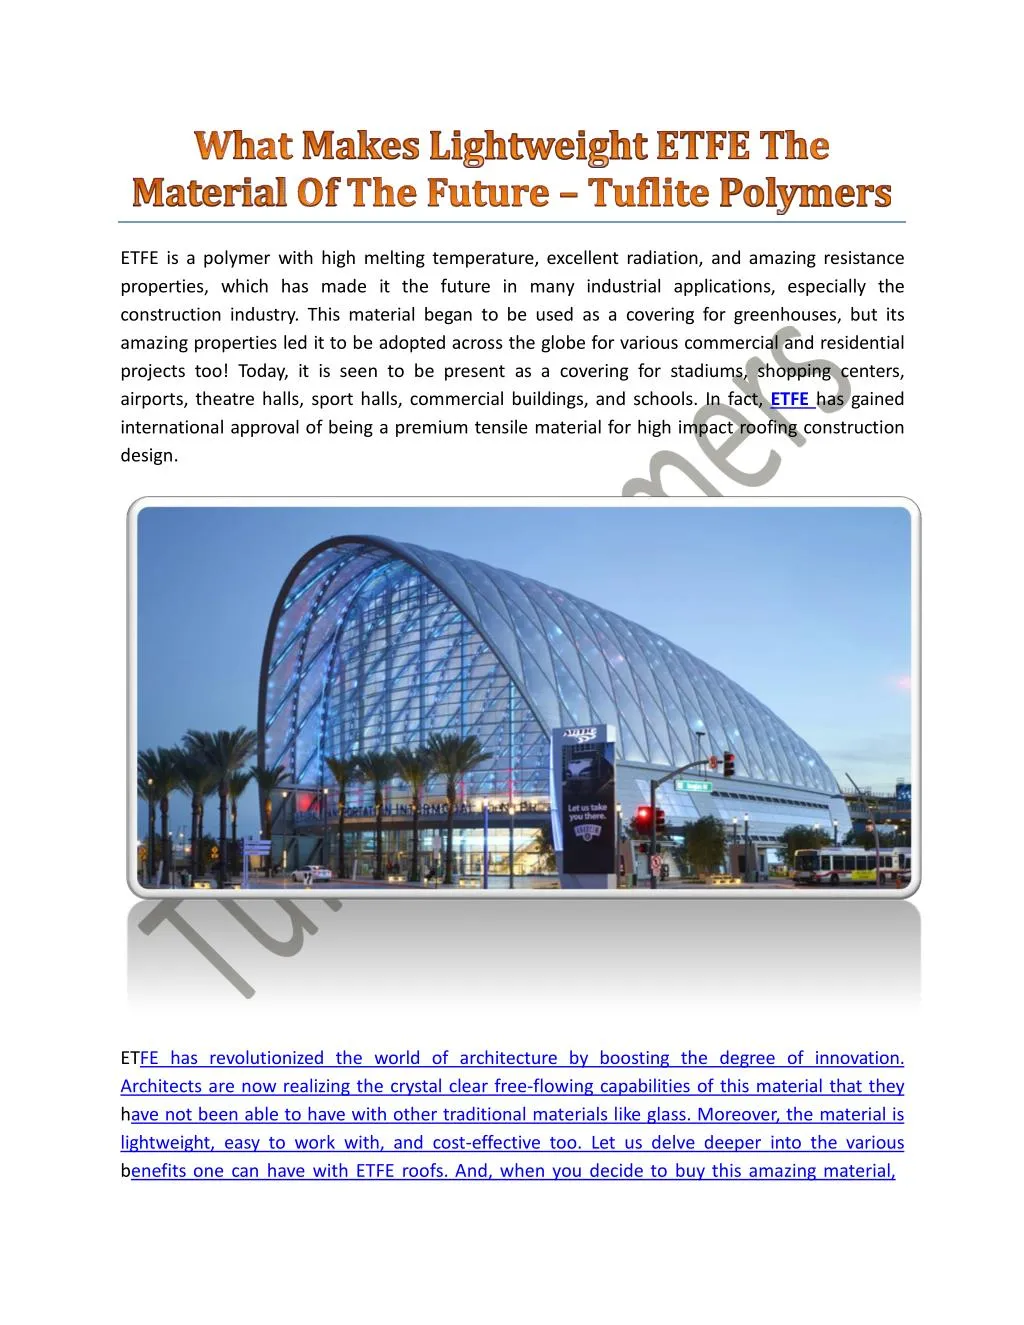 etfe is a polymer with high melting temperature